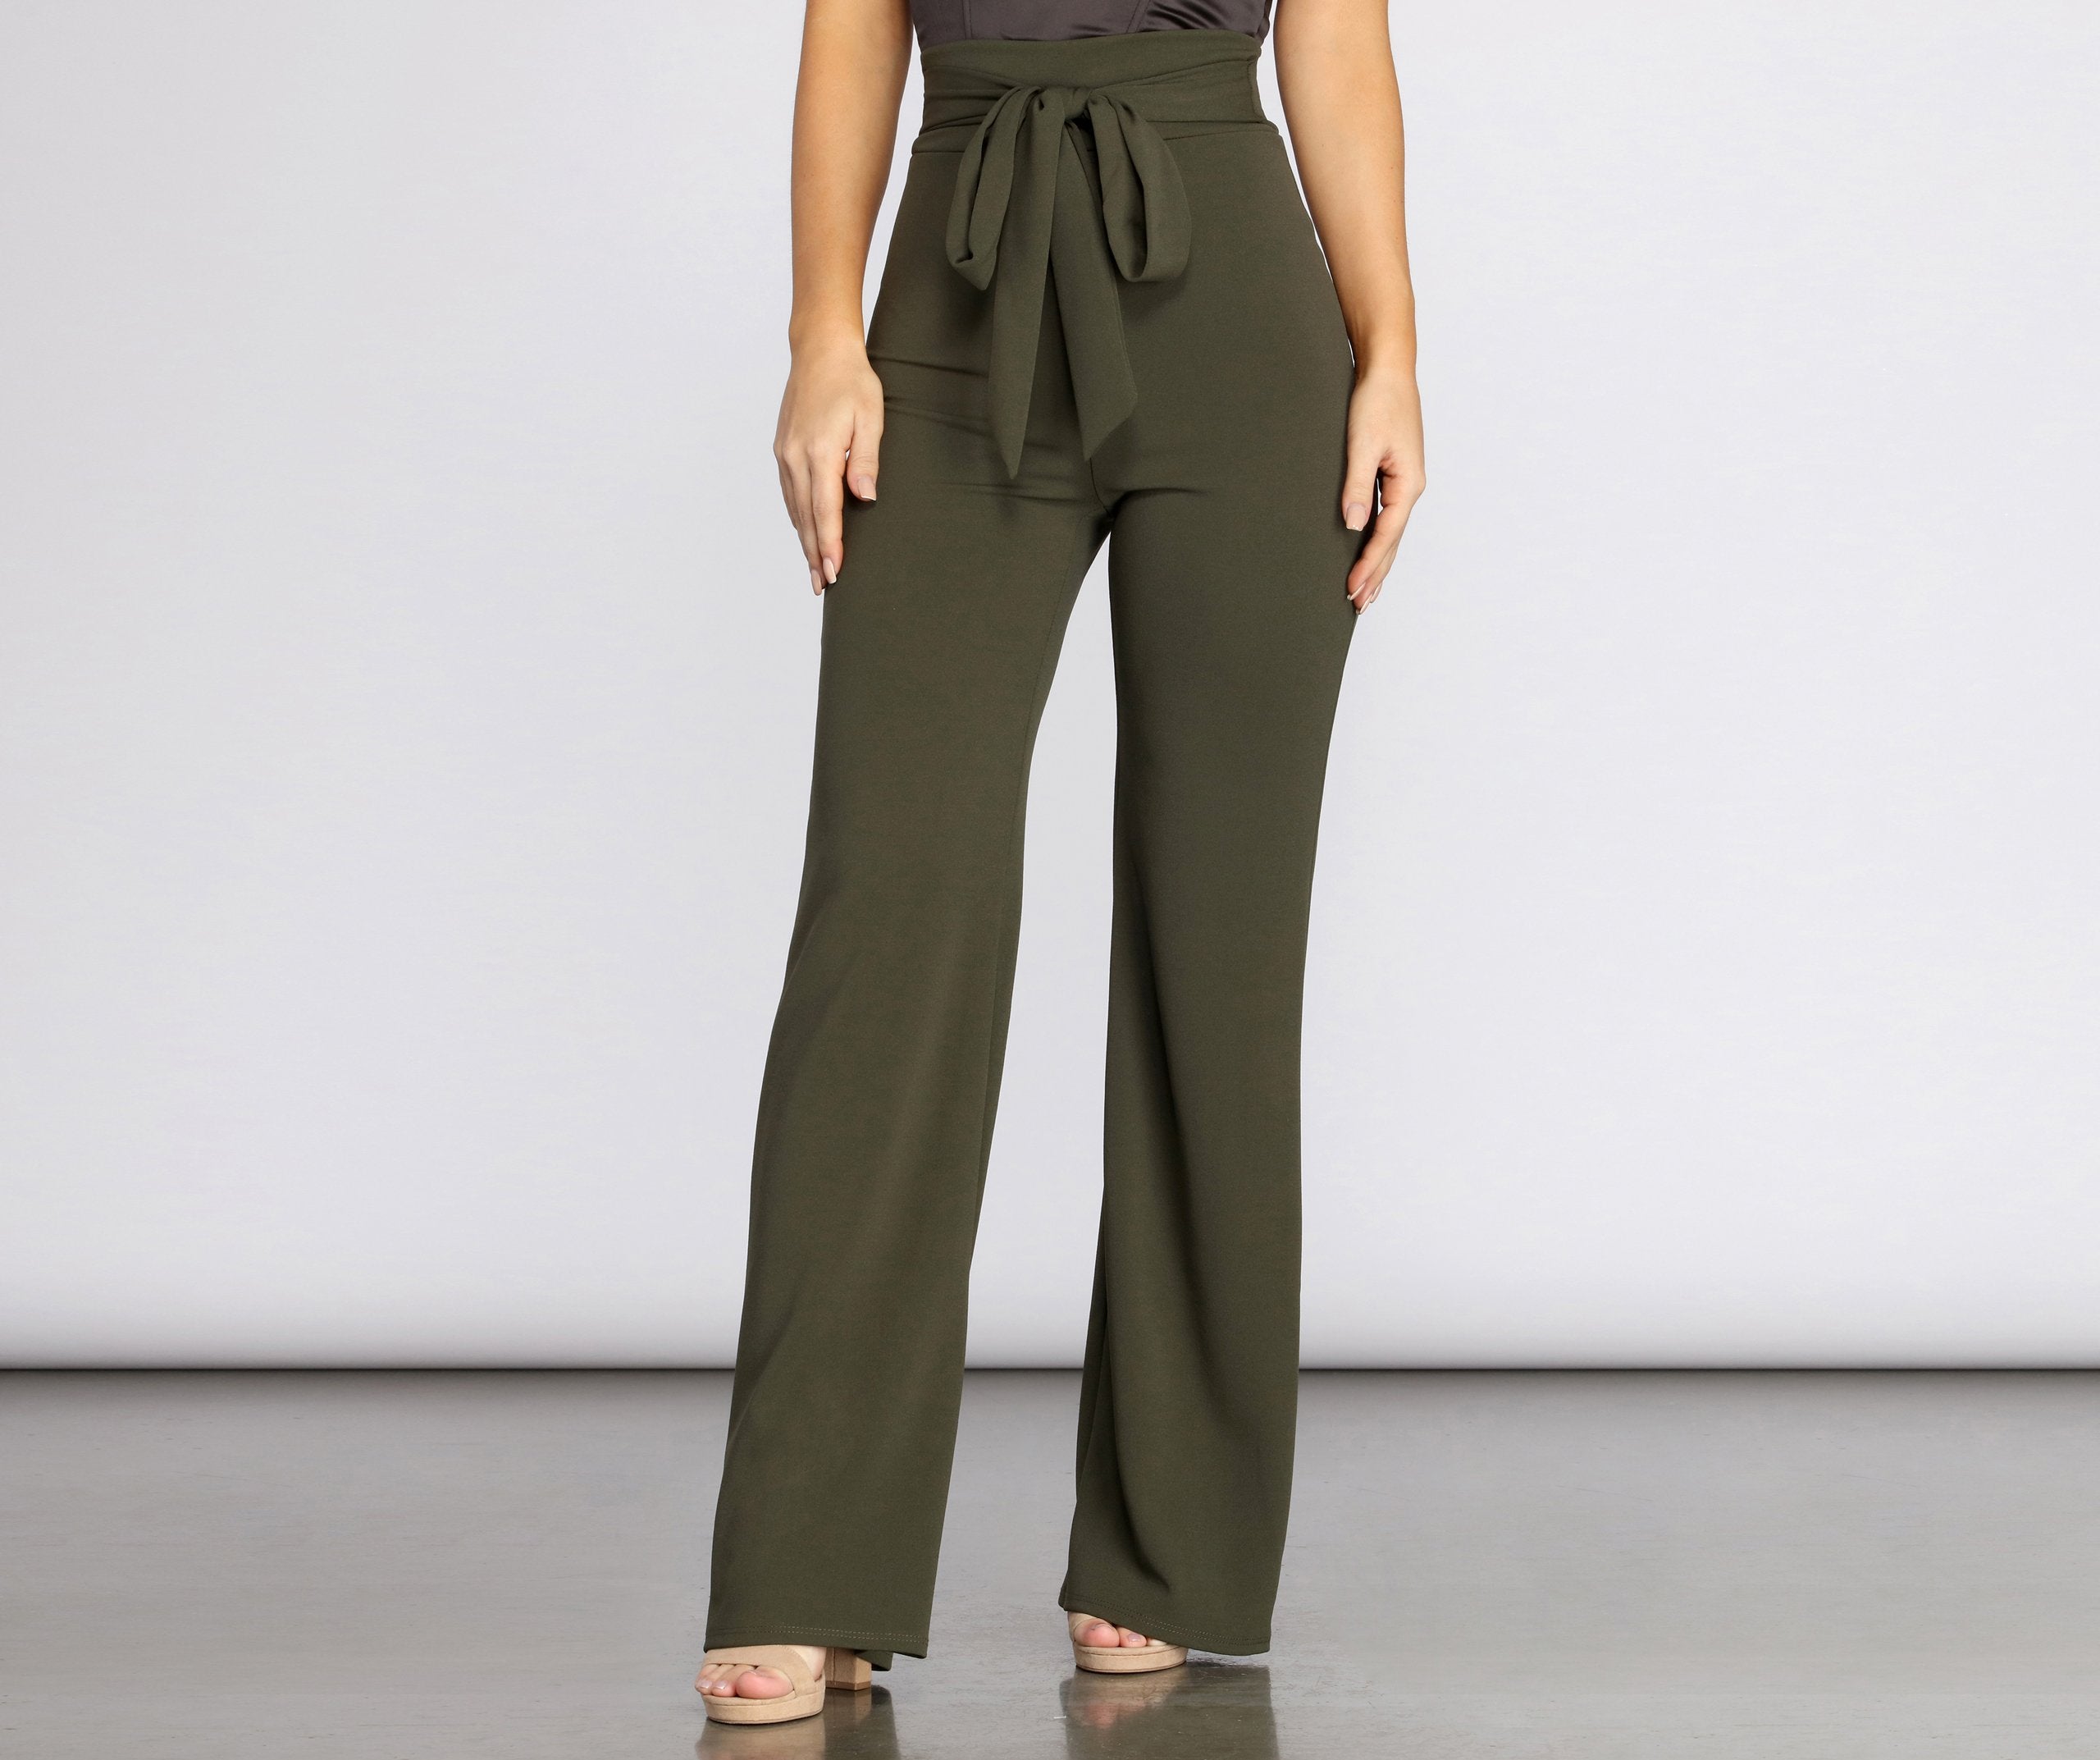 Sealed With Style Tie-Waist Pants